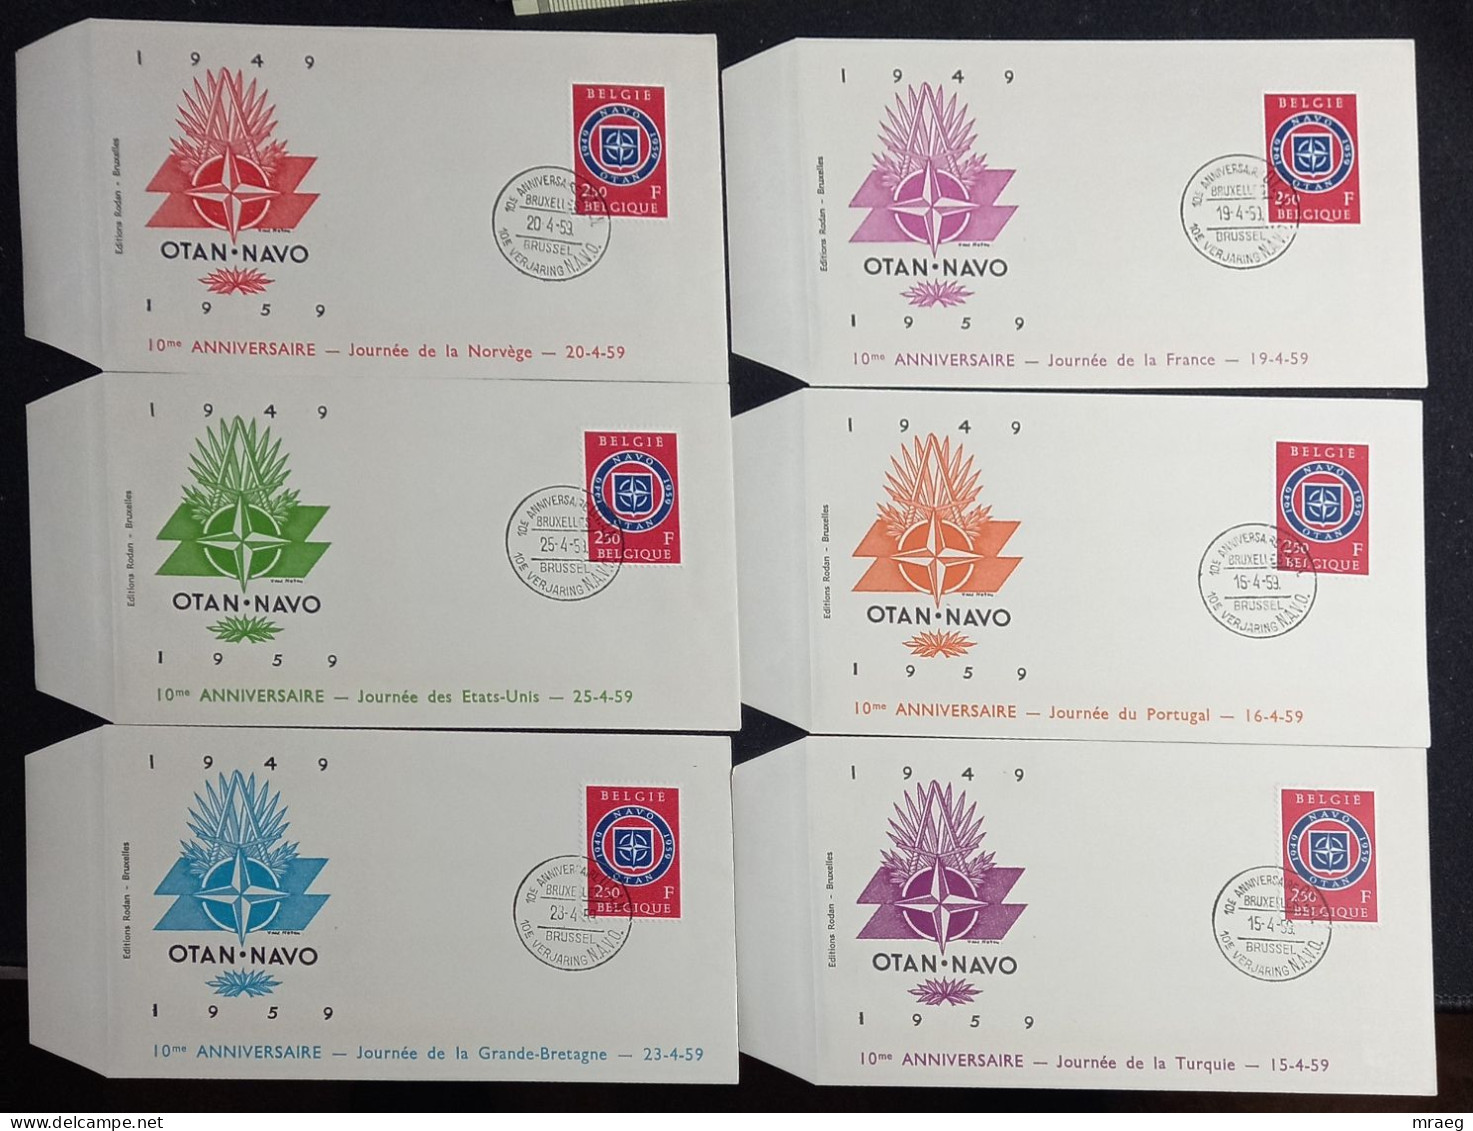 BELGIUM 1959 The 10th Anniversary Of NATO FDC Covers SET 12 Covers Together. - Briefe U. Dokumente